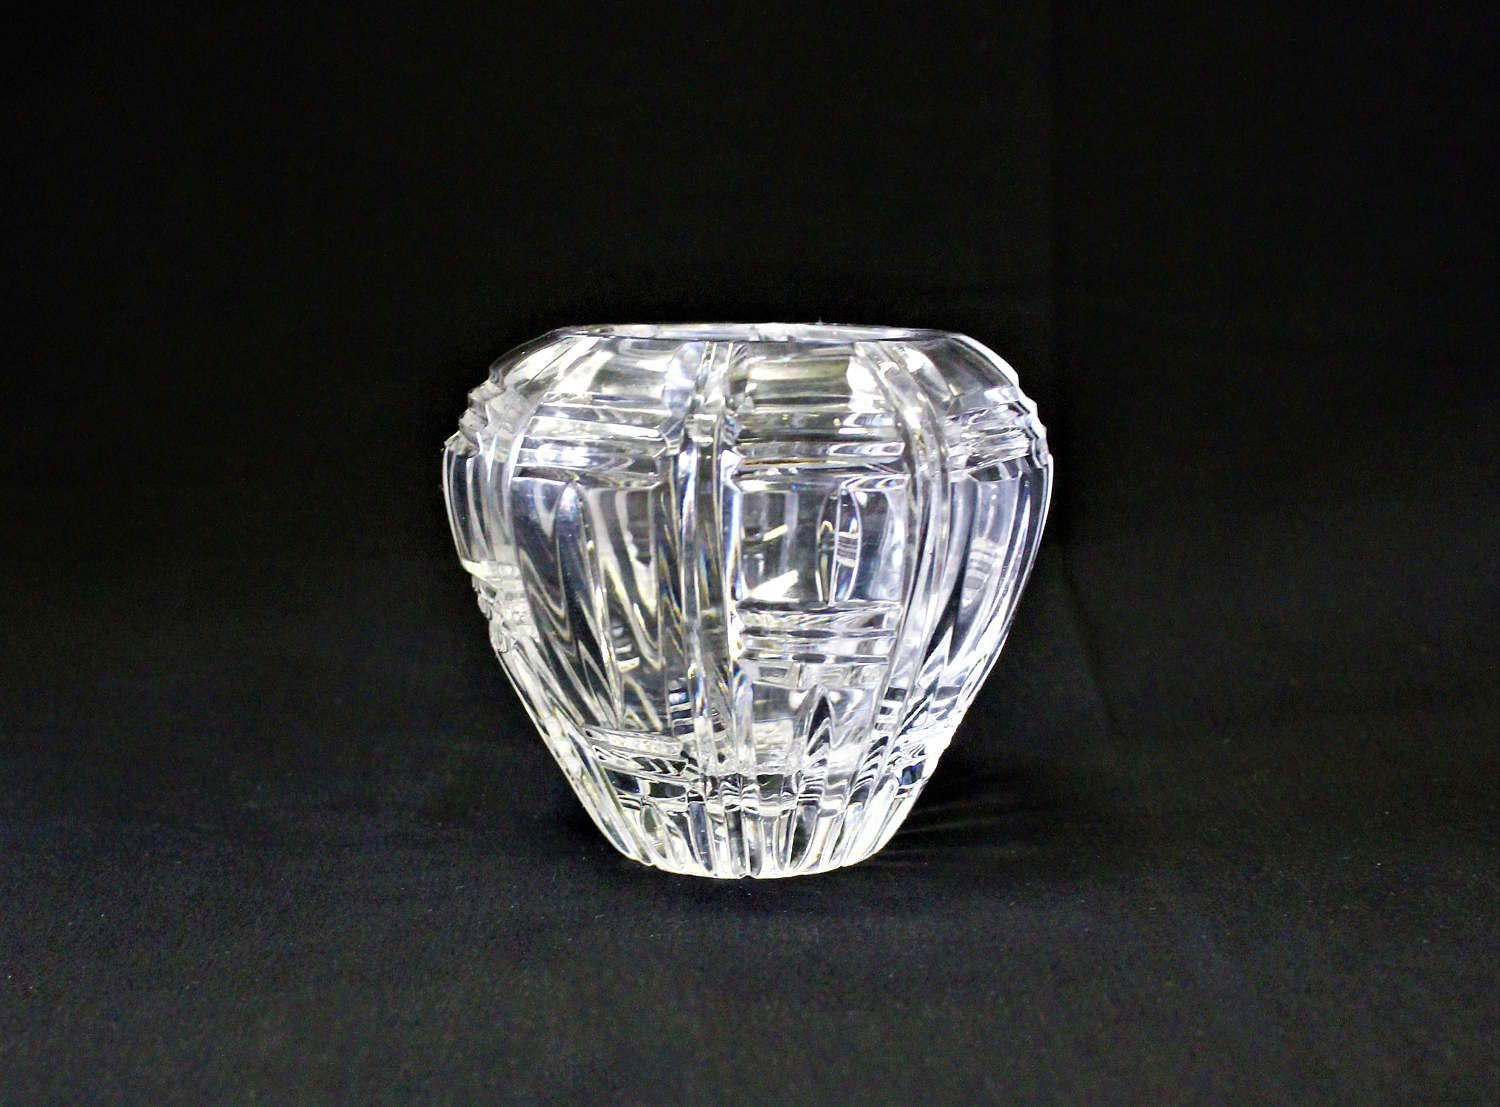 10 Lovable Lenox Bud Vases Set Of 3 2024 free download lenox bud vases set of 3 of vintage small spherical heavy cut optic lead crystal repetitive regarding vintage small spherical heavy cut optic lead crystal repetitive geometric design rose or